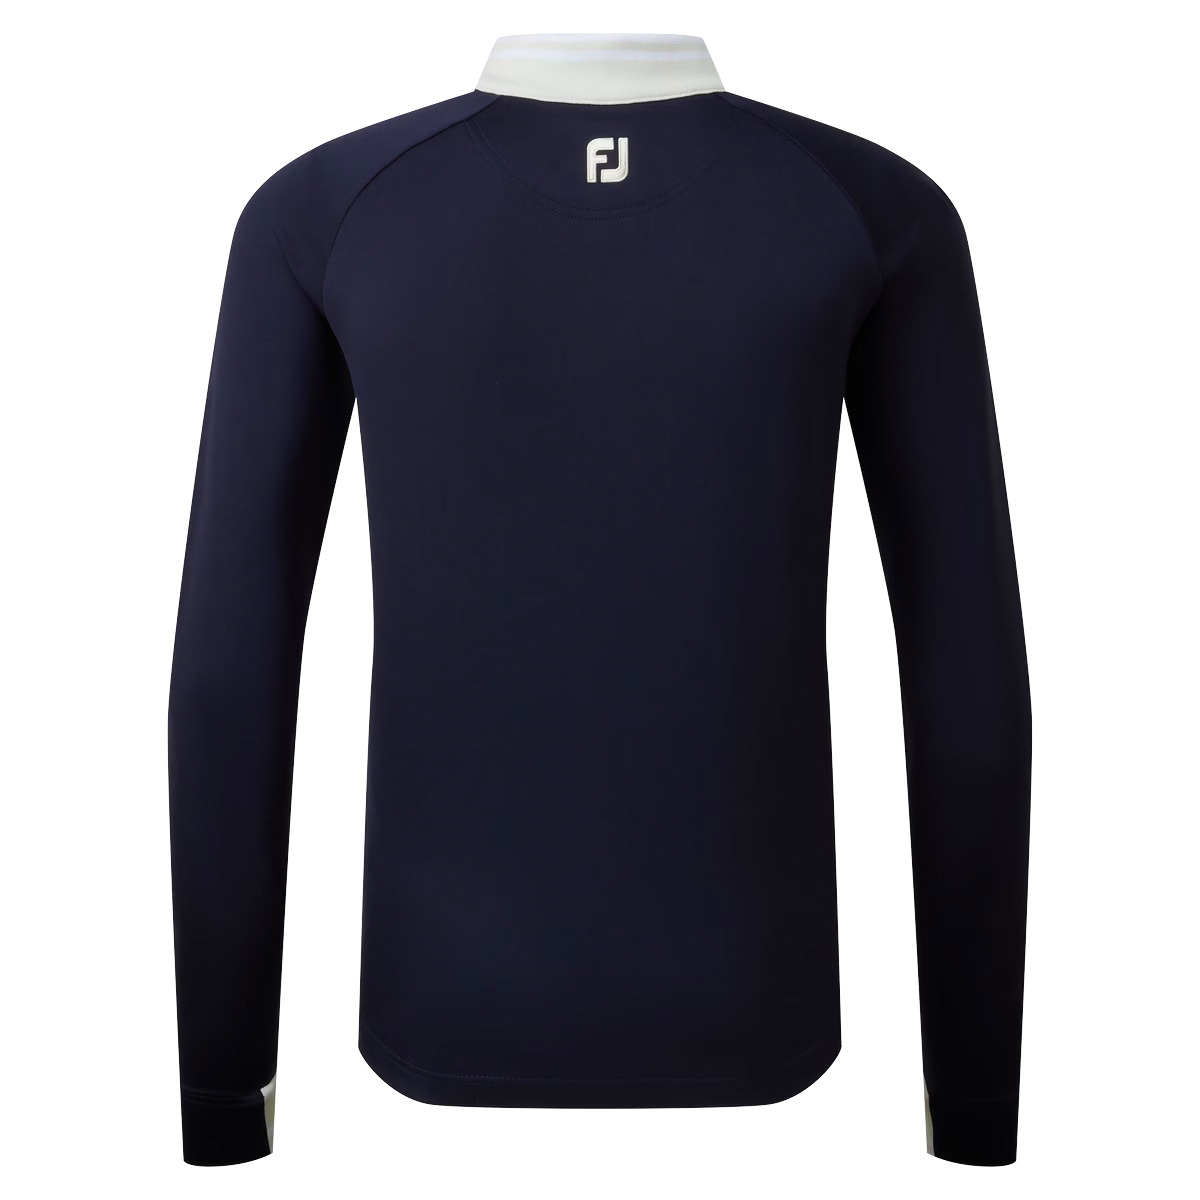 FootJoy Rib Trim Chill Out Mens Golf Pullover  - Navy/Almond